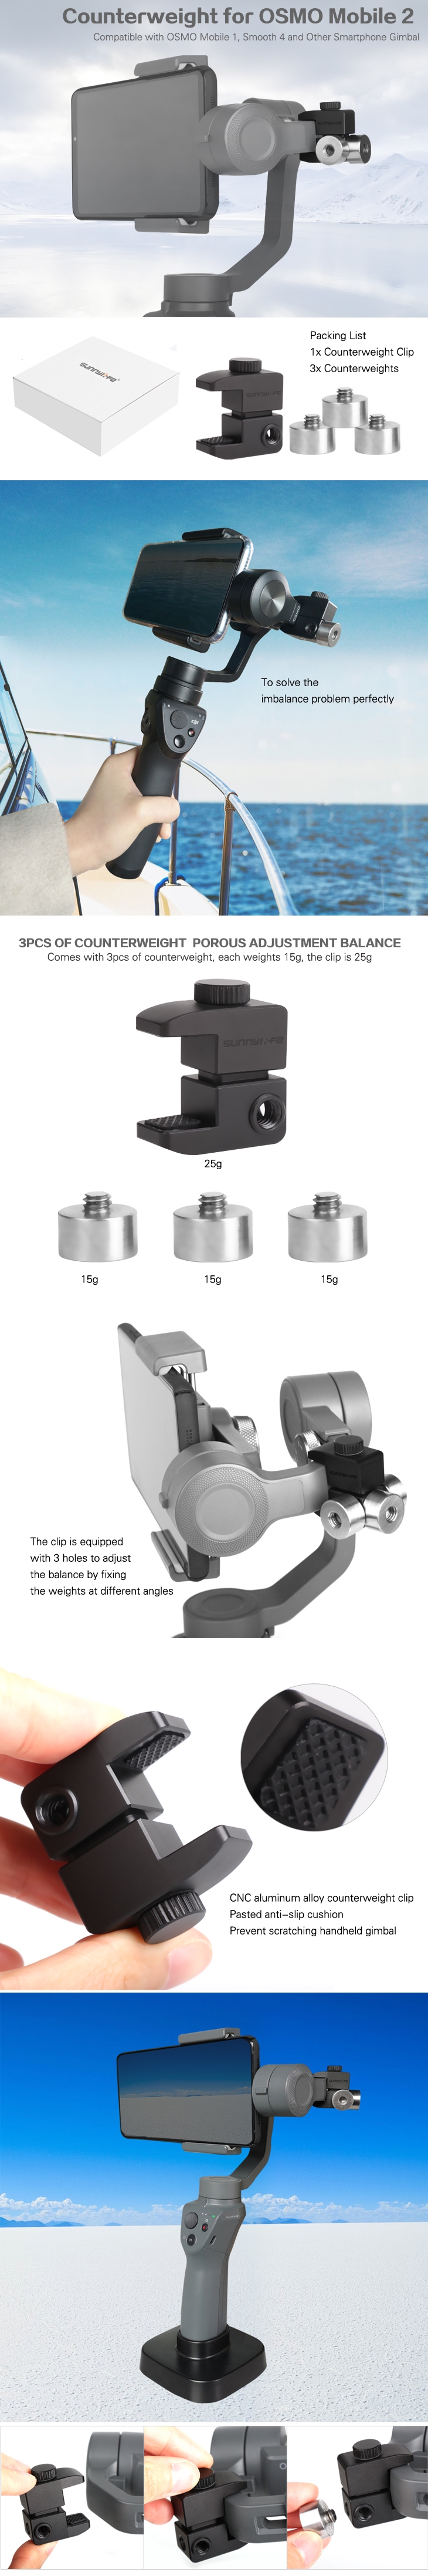 Balance Counterweight Clip for DJI OSMO Mobile 1/Mobile 2/Zhiyun Smooth 4/Smooth Q/Vimble 2 Handheld Gimbal Stabilizer